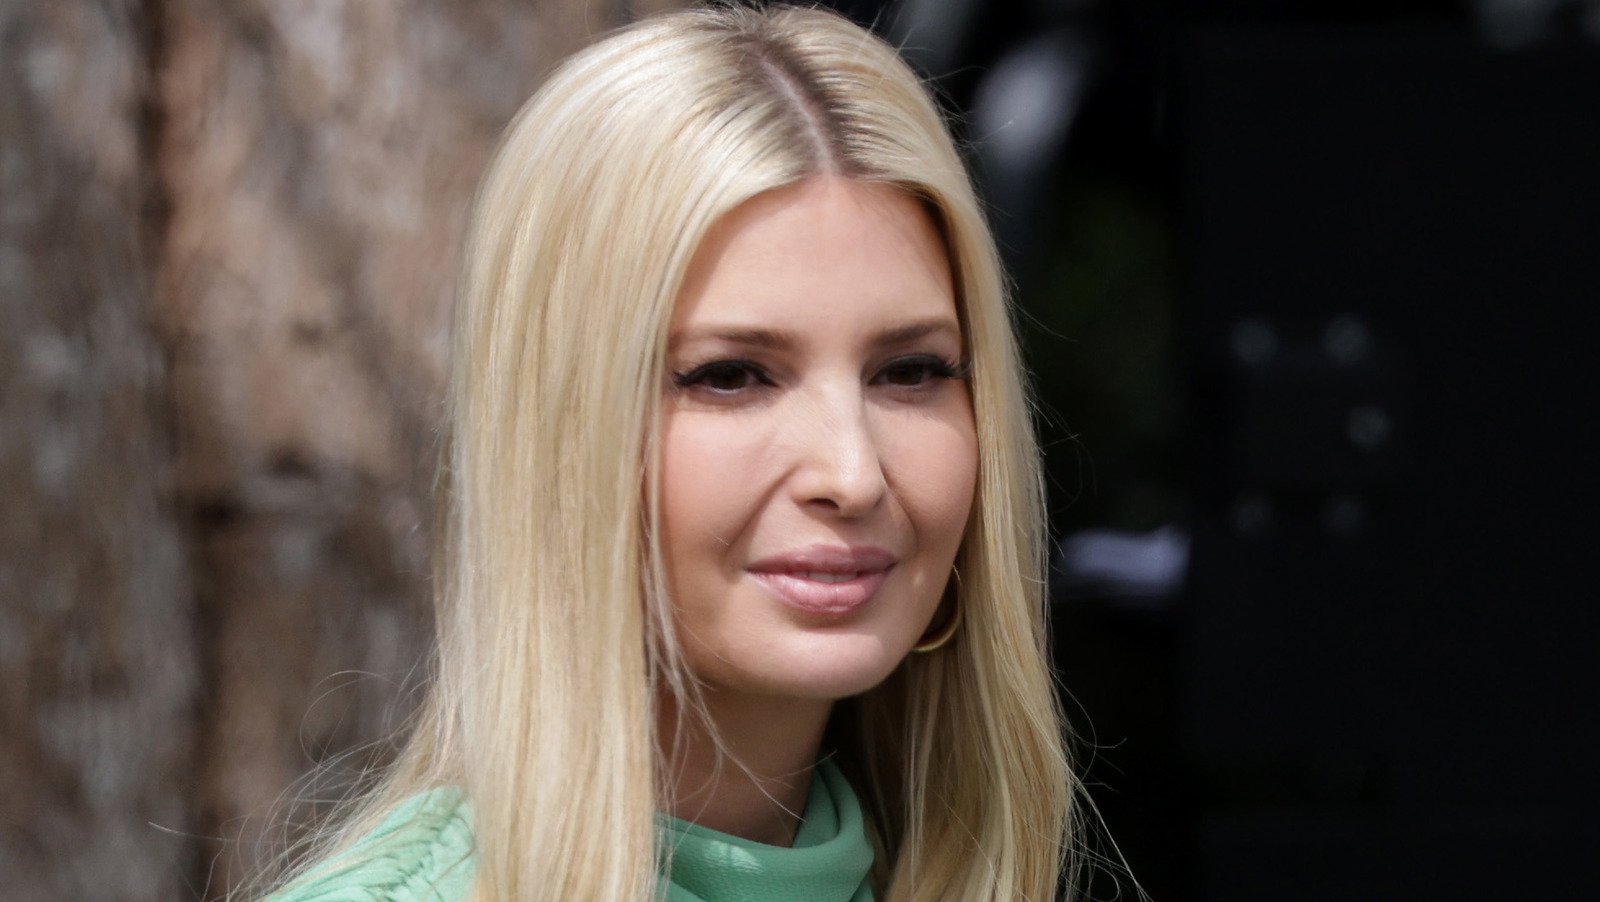 The Best And Worst Days Of Ivanka Trump's Life